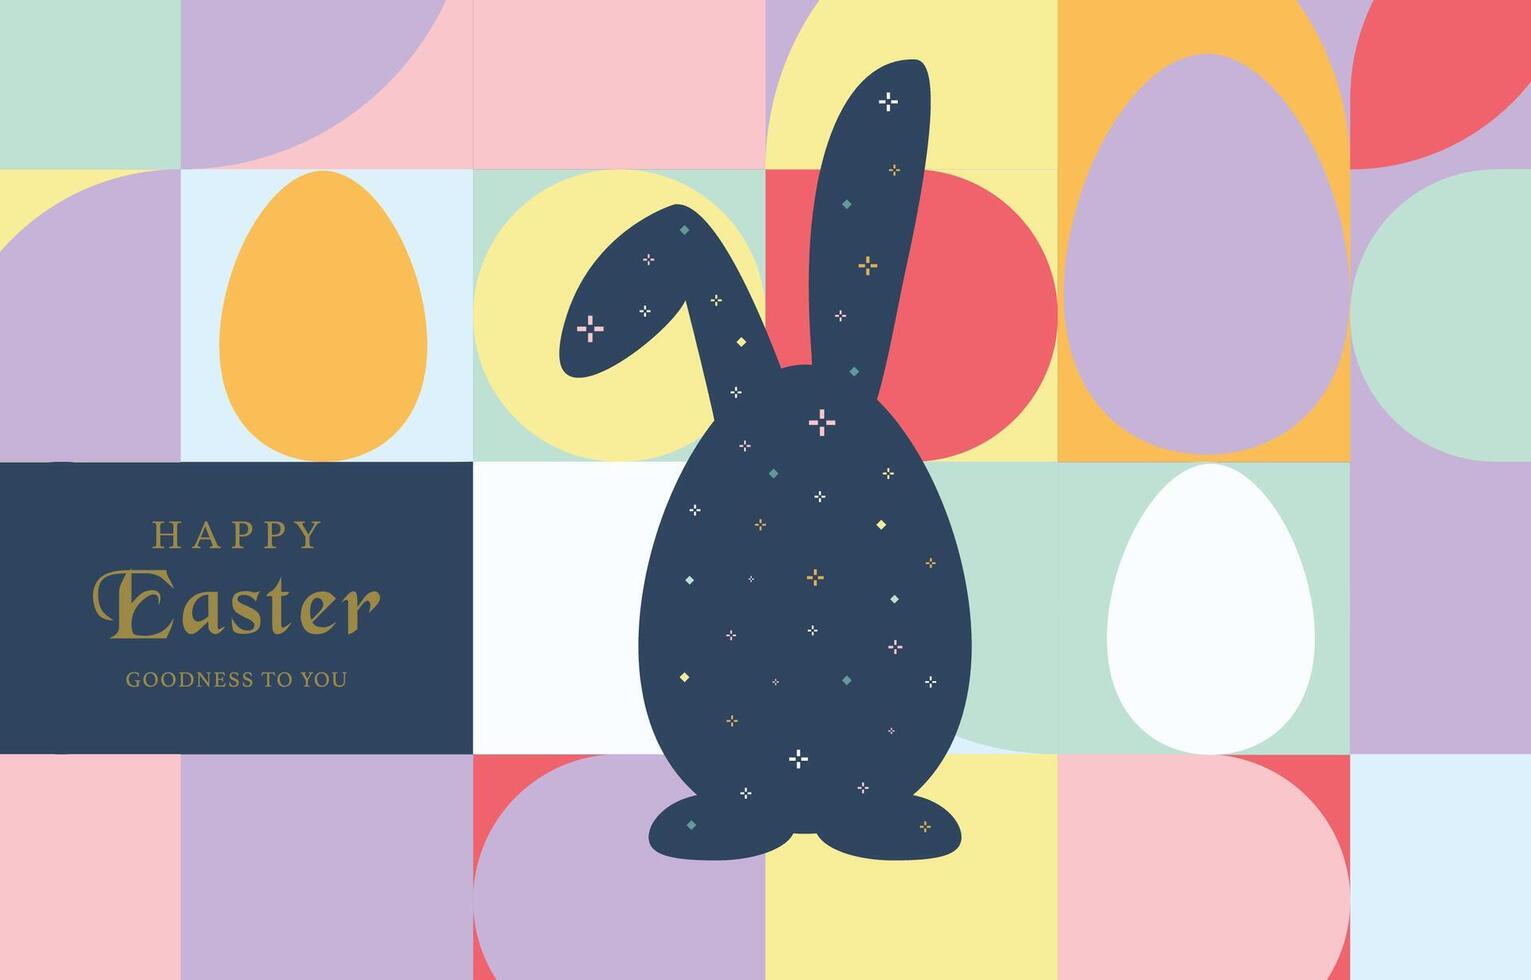 Easter day background for horizontal banner design with geometric style vector